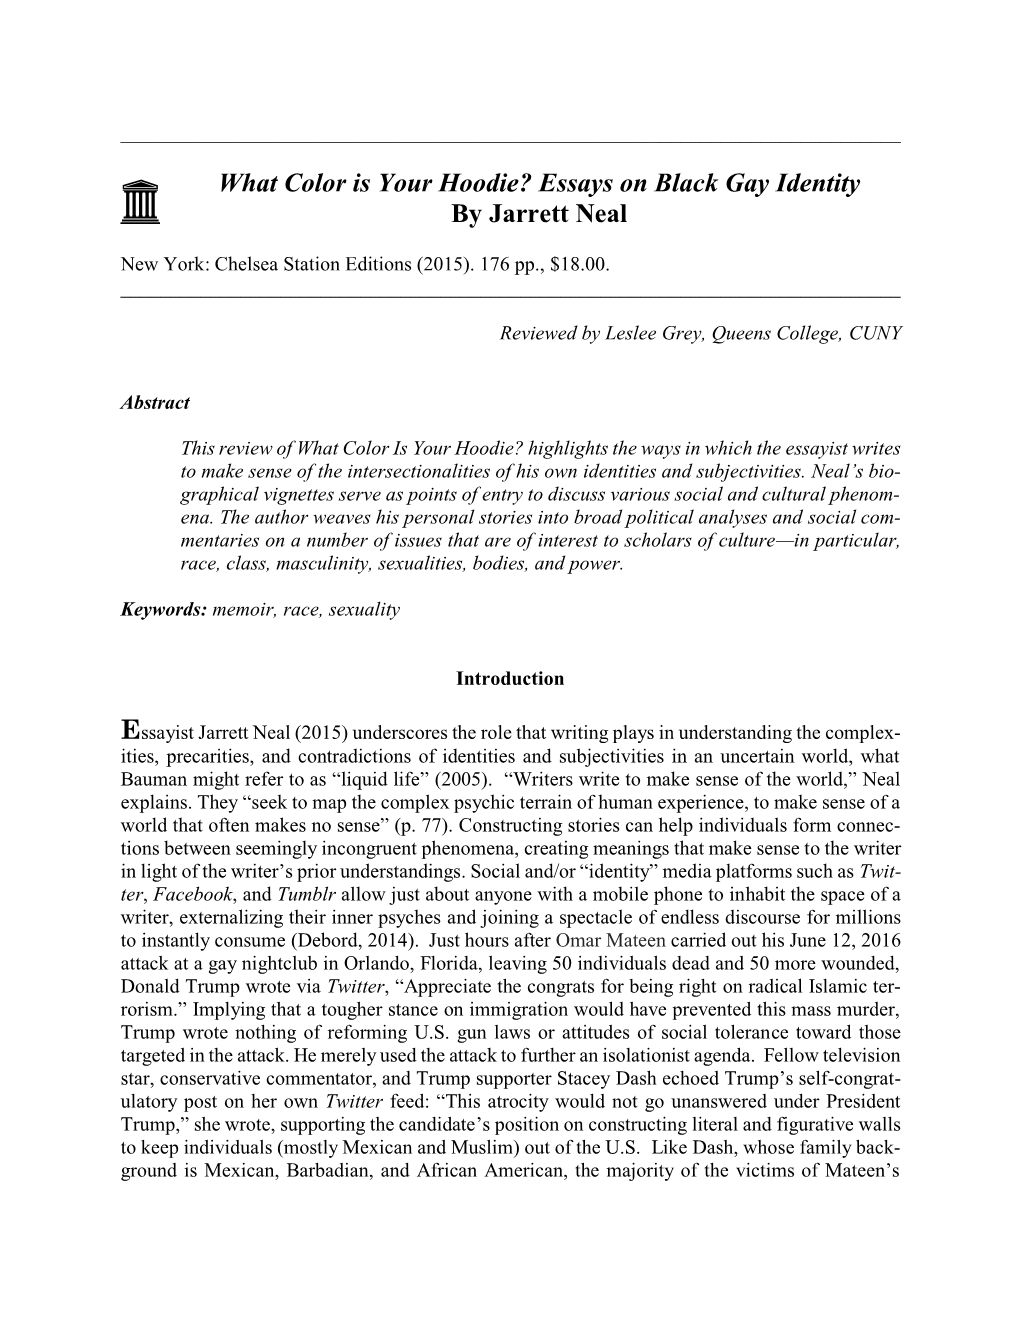 What Color Is Your Hoodie? Essays on Black Gay Identity by Jarrett Neal